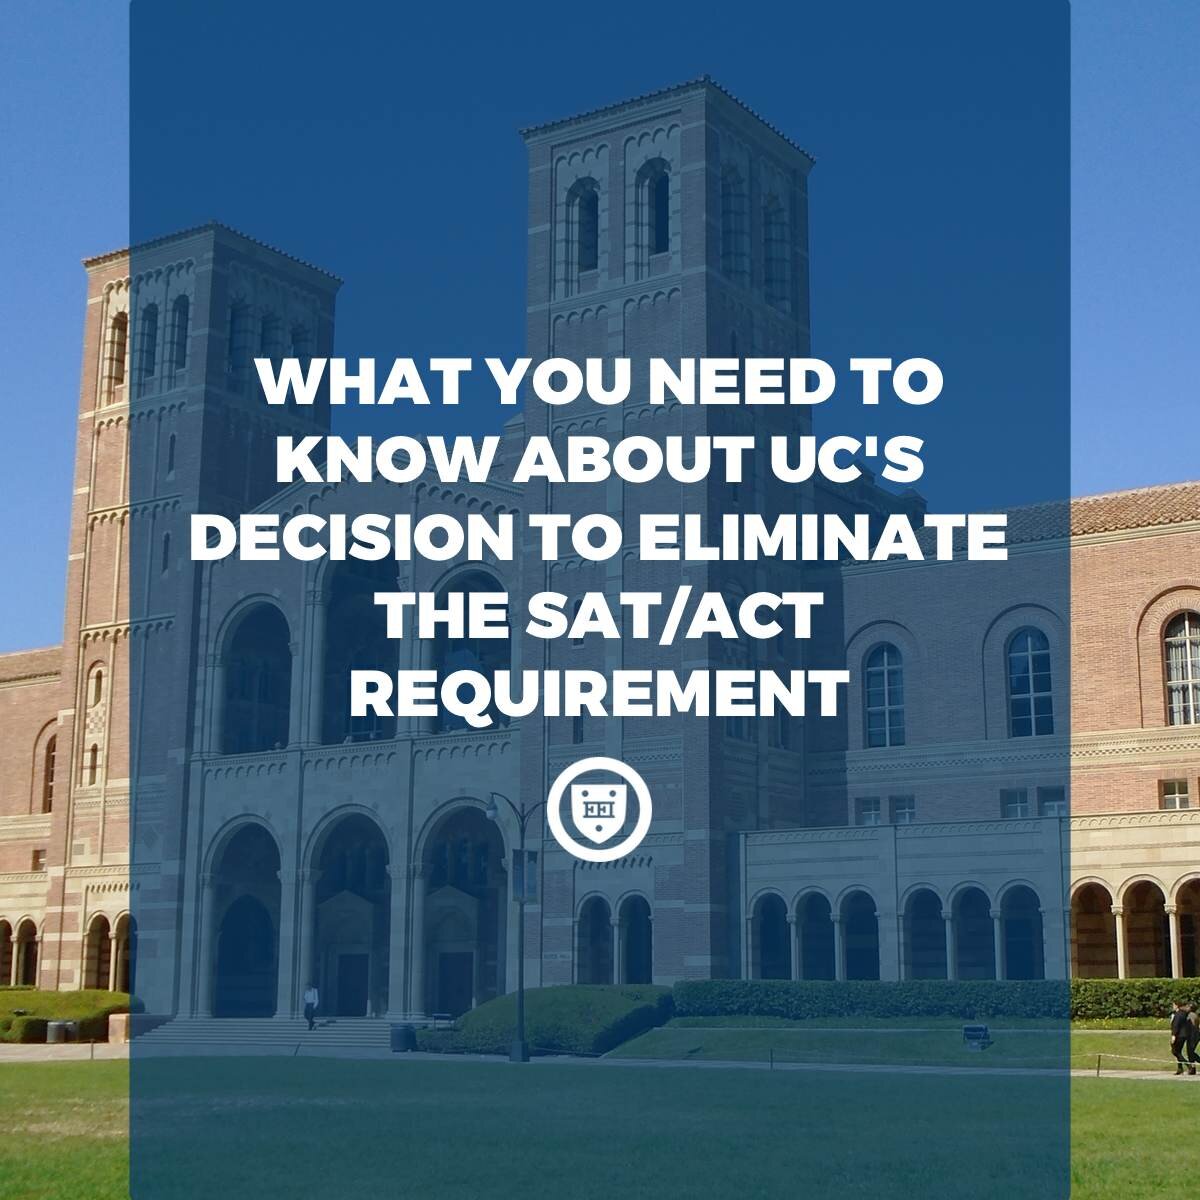 What You Need to Know About UC's Decision to Eliminate the SAT/ACT